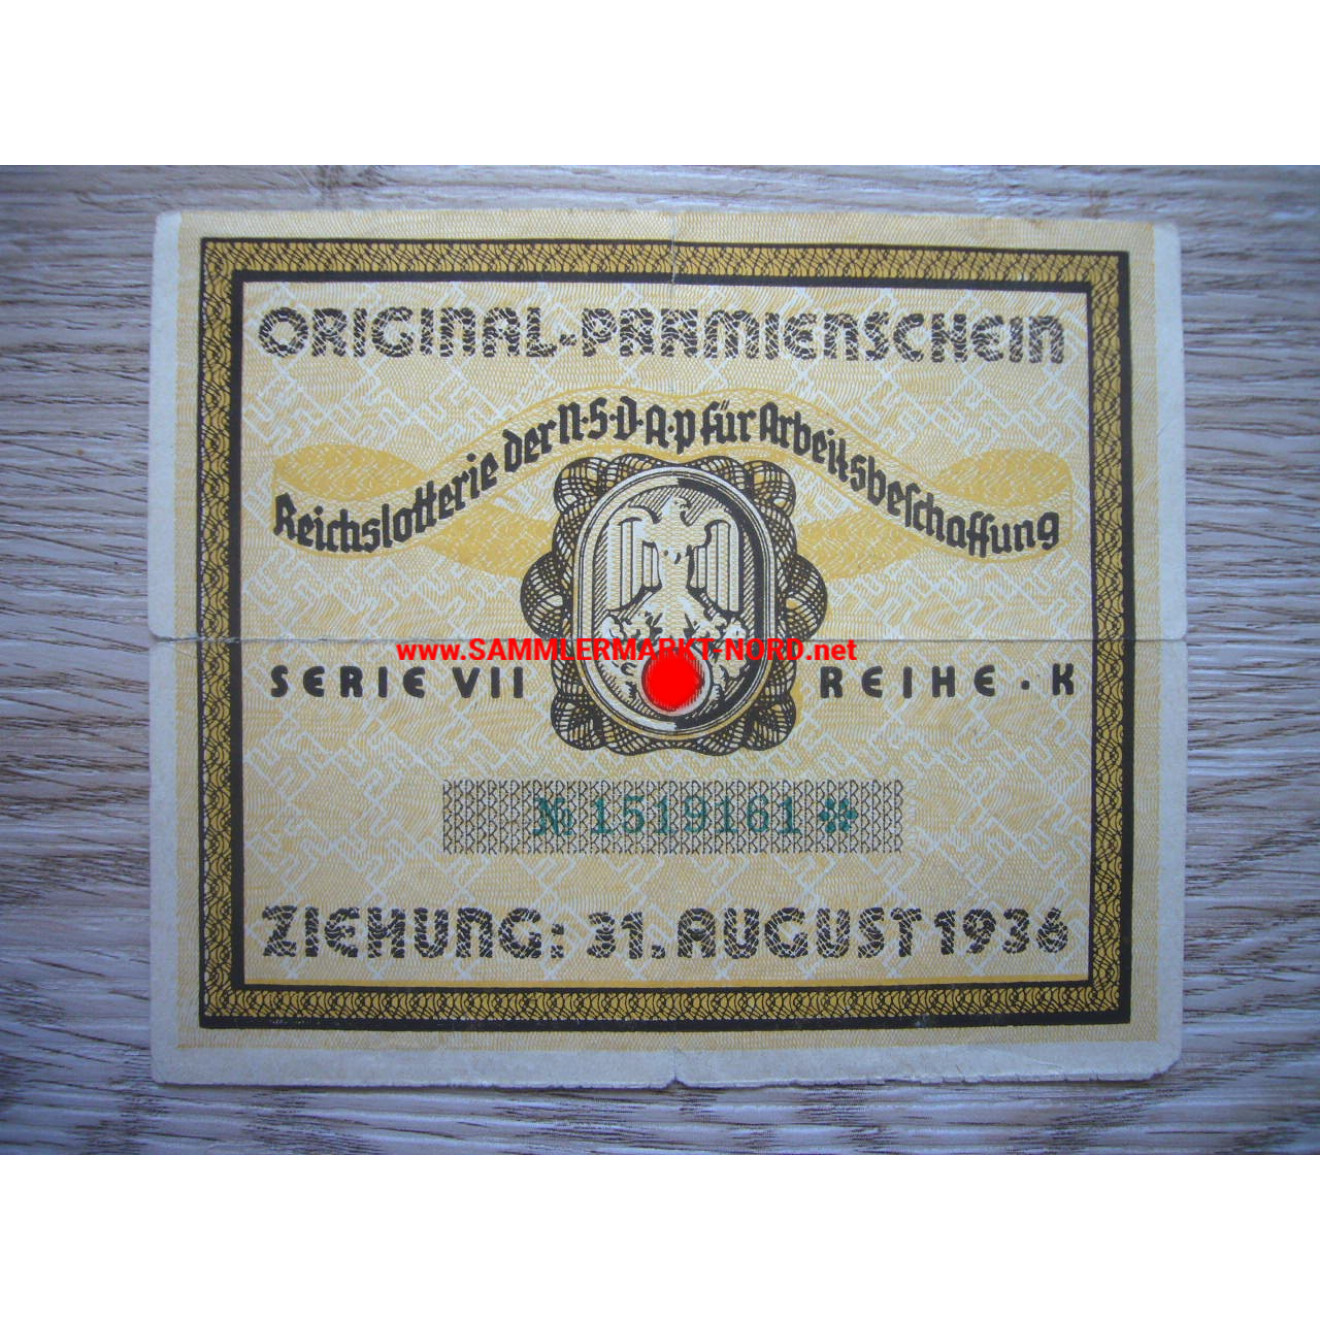 Reich lottery of the NSDAP for job creation - premium coupon 1936